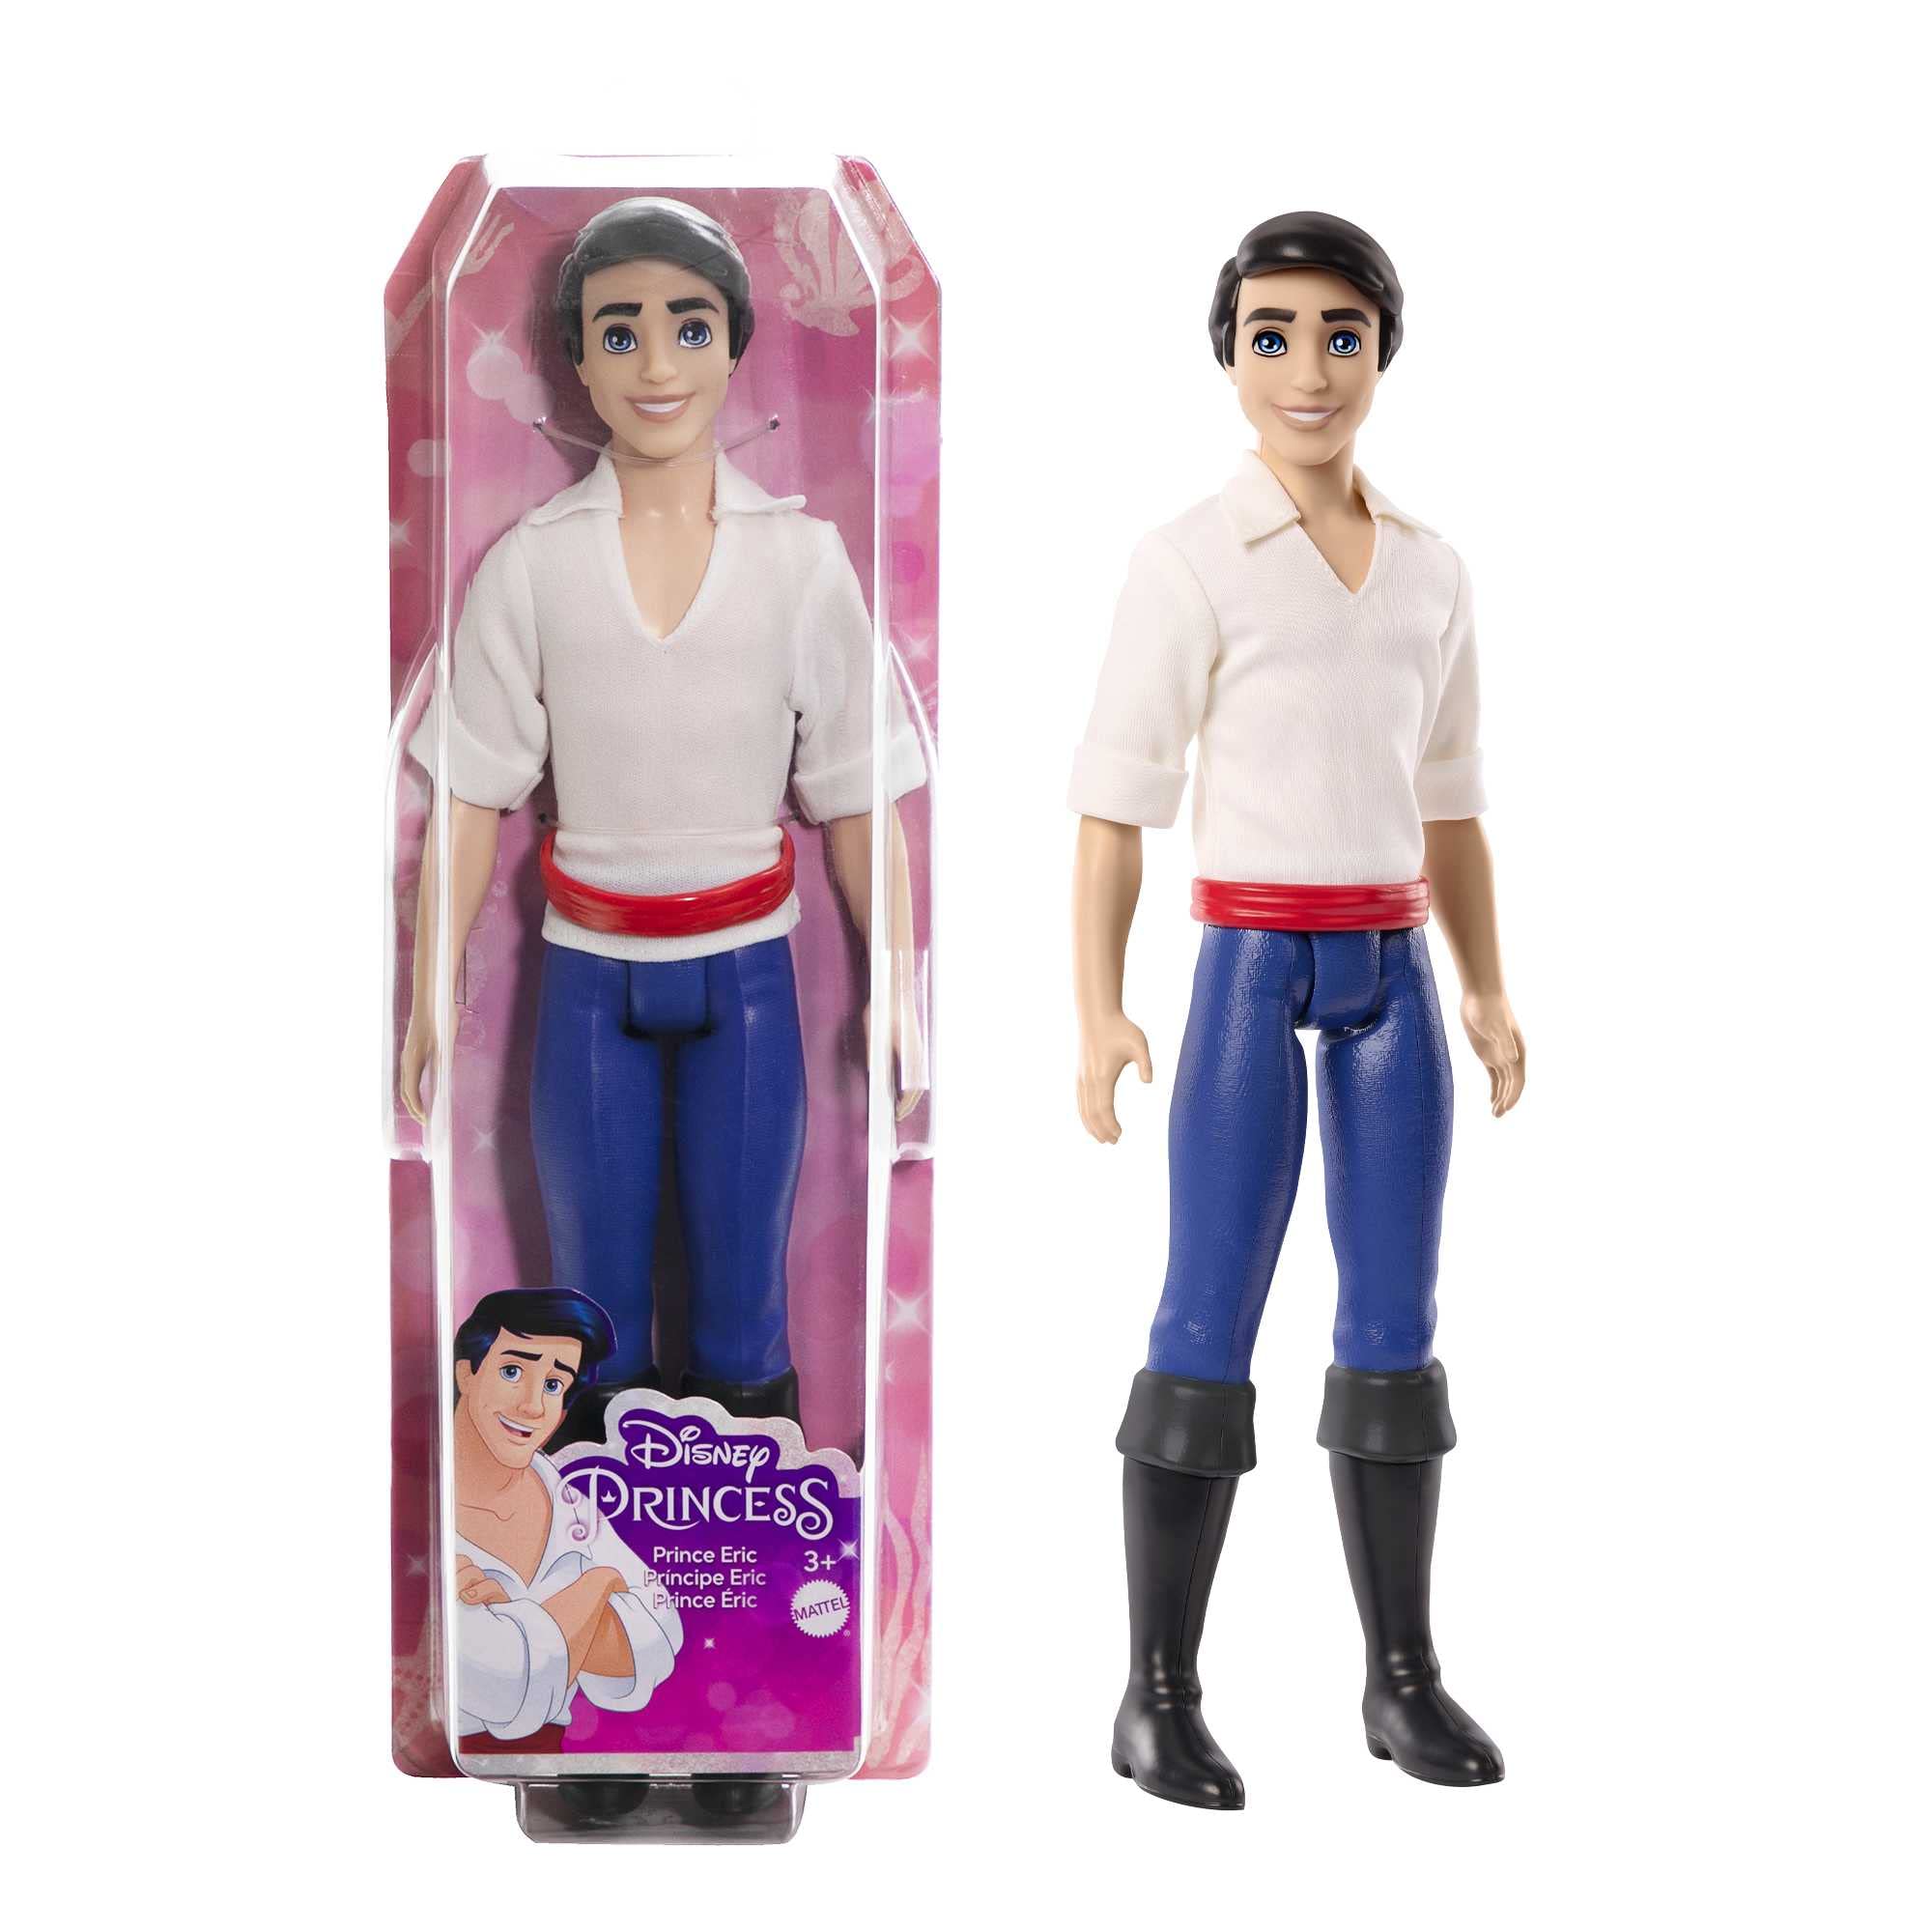 Disney Princess Prince Eric Fashion Doll in Hero Outfit from Disney Movie The Little Mermaid, Posable